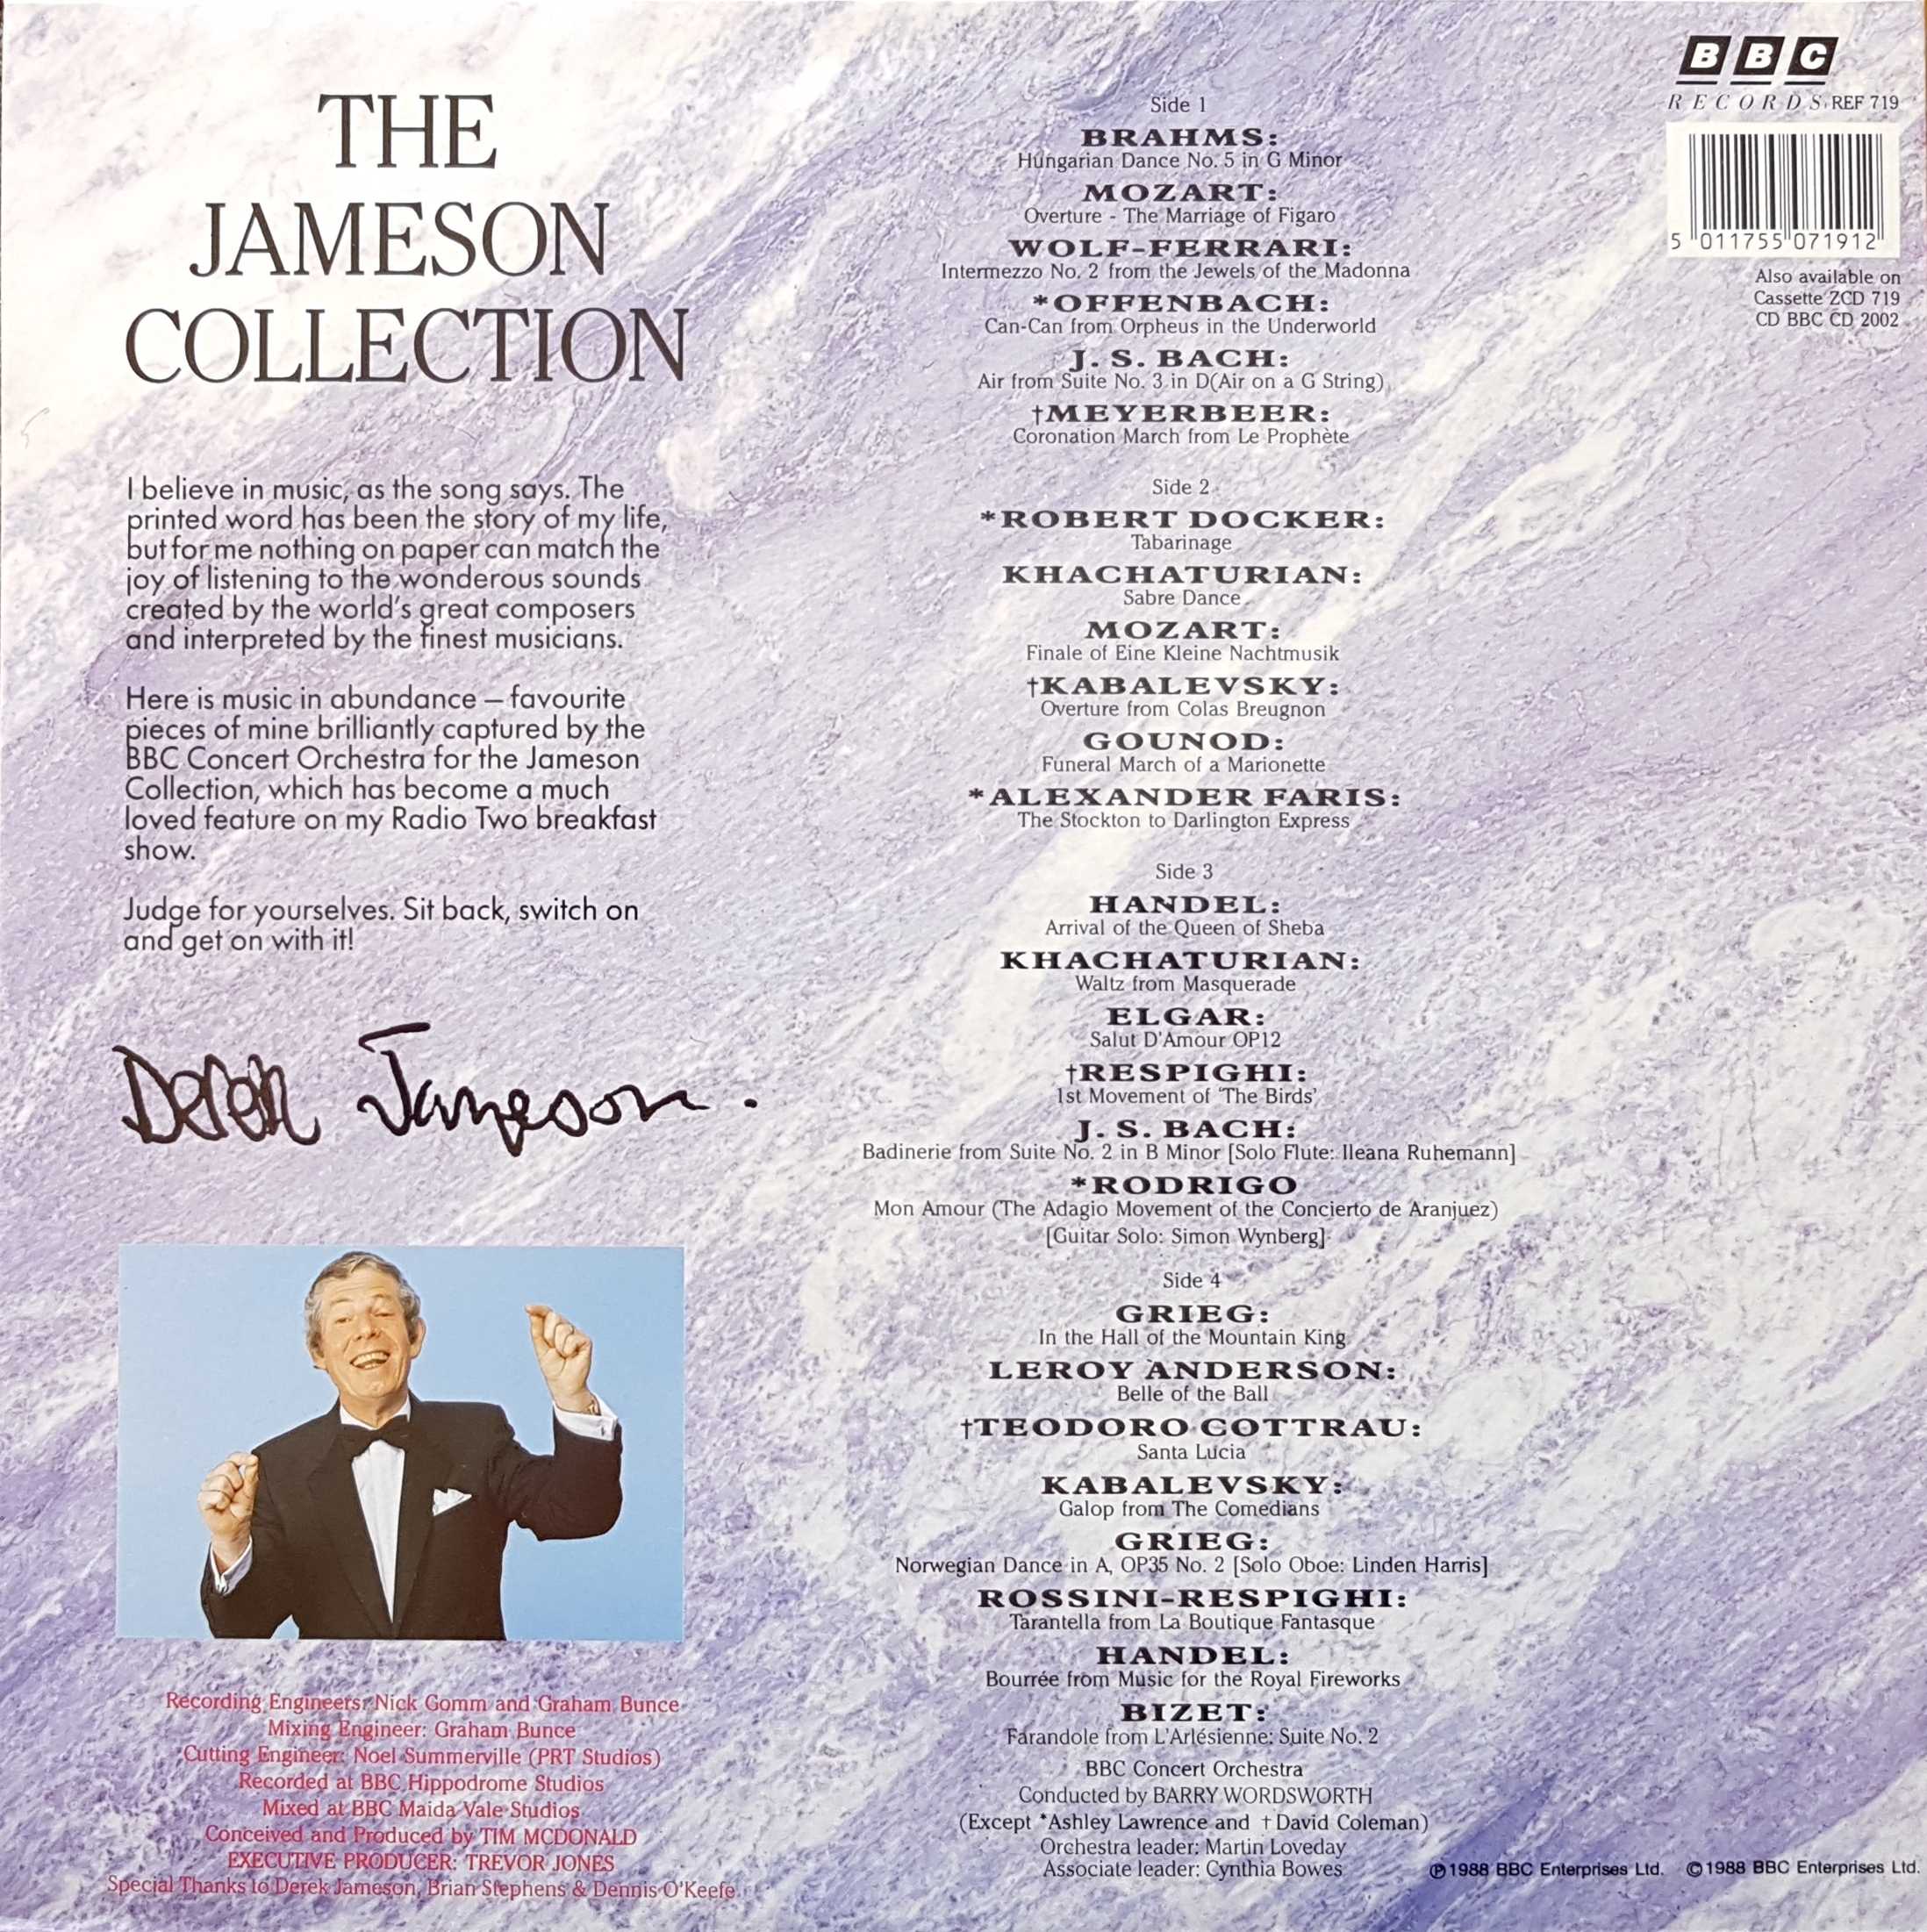 Picture of REF 719 Derek Jameson collection by artist Derek Jameson  from the BBC records and Tapes library